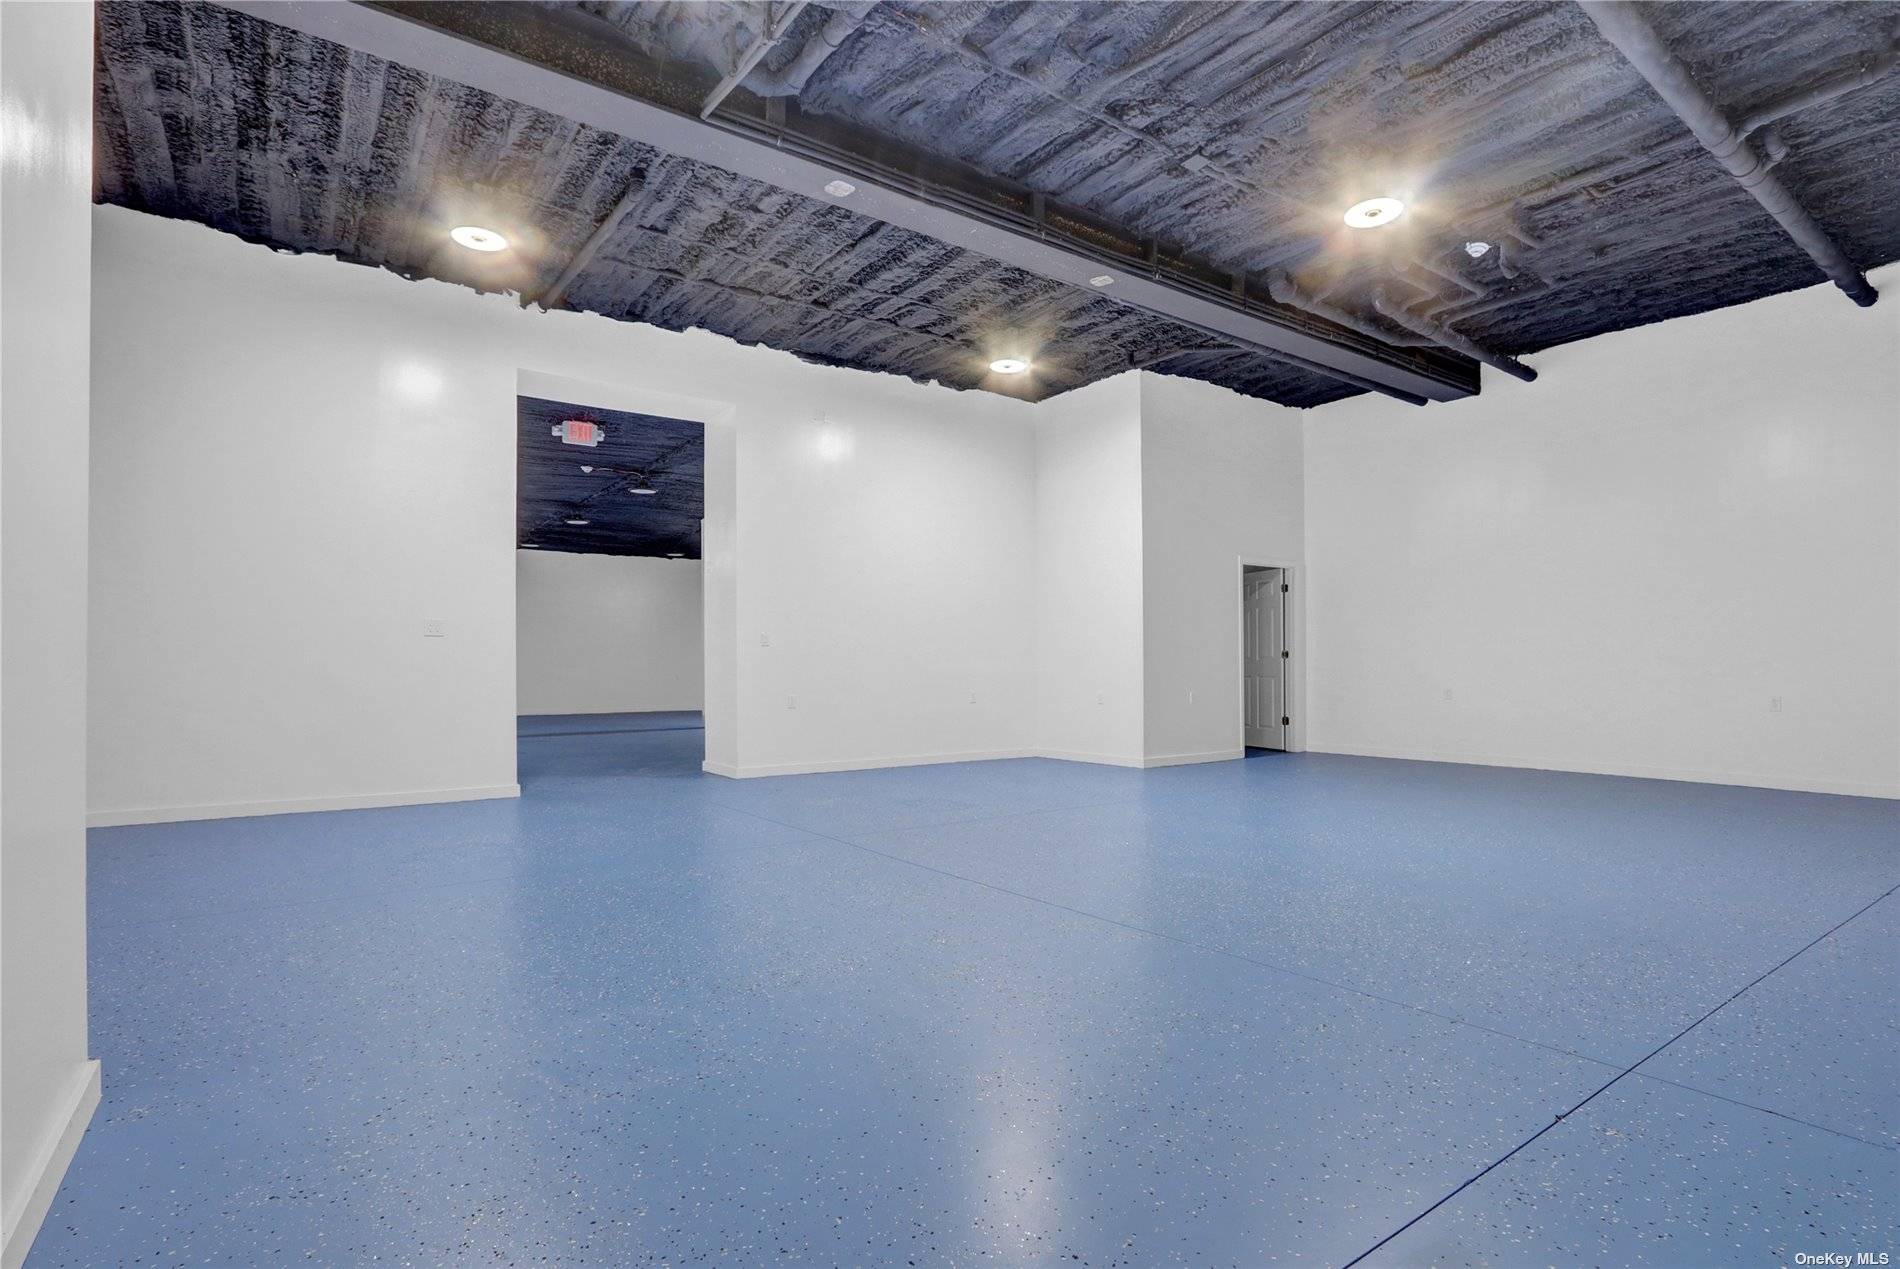 Warehouse space available in New Hyde Park which offers 1400 sqft with 13 foot ceilings, climate control comes with parking space and utilities included in the rent.